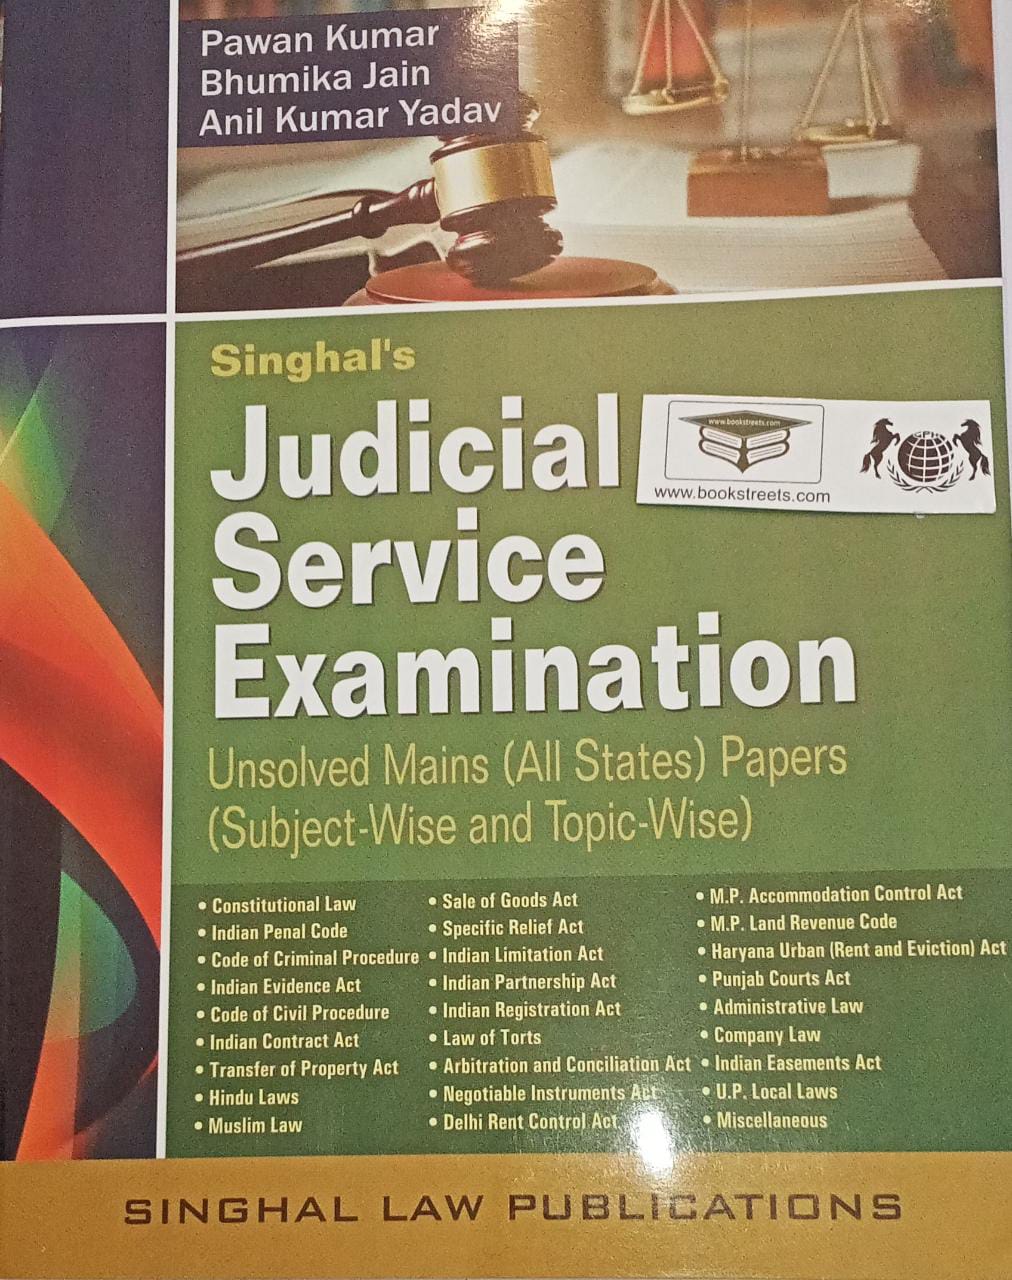 Singhal's Judicial Service Examination Unsolved Mains (All States) Papers by Singhal Law Publications